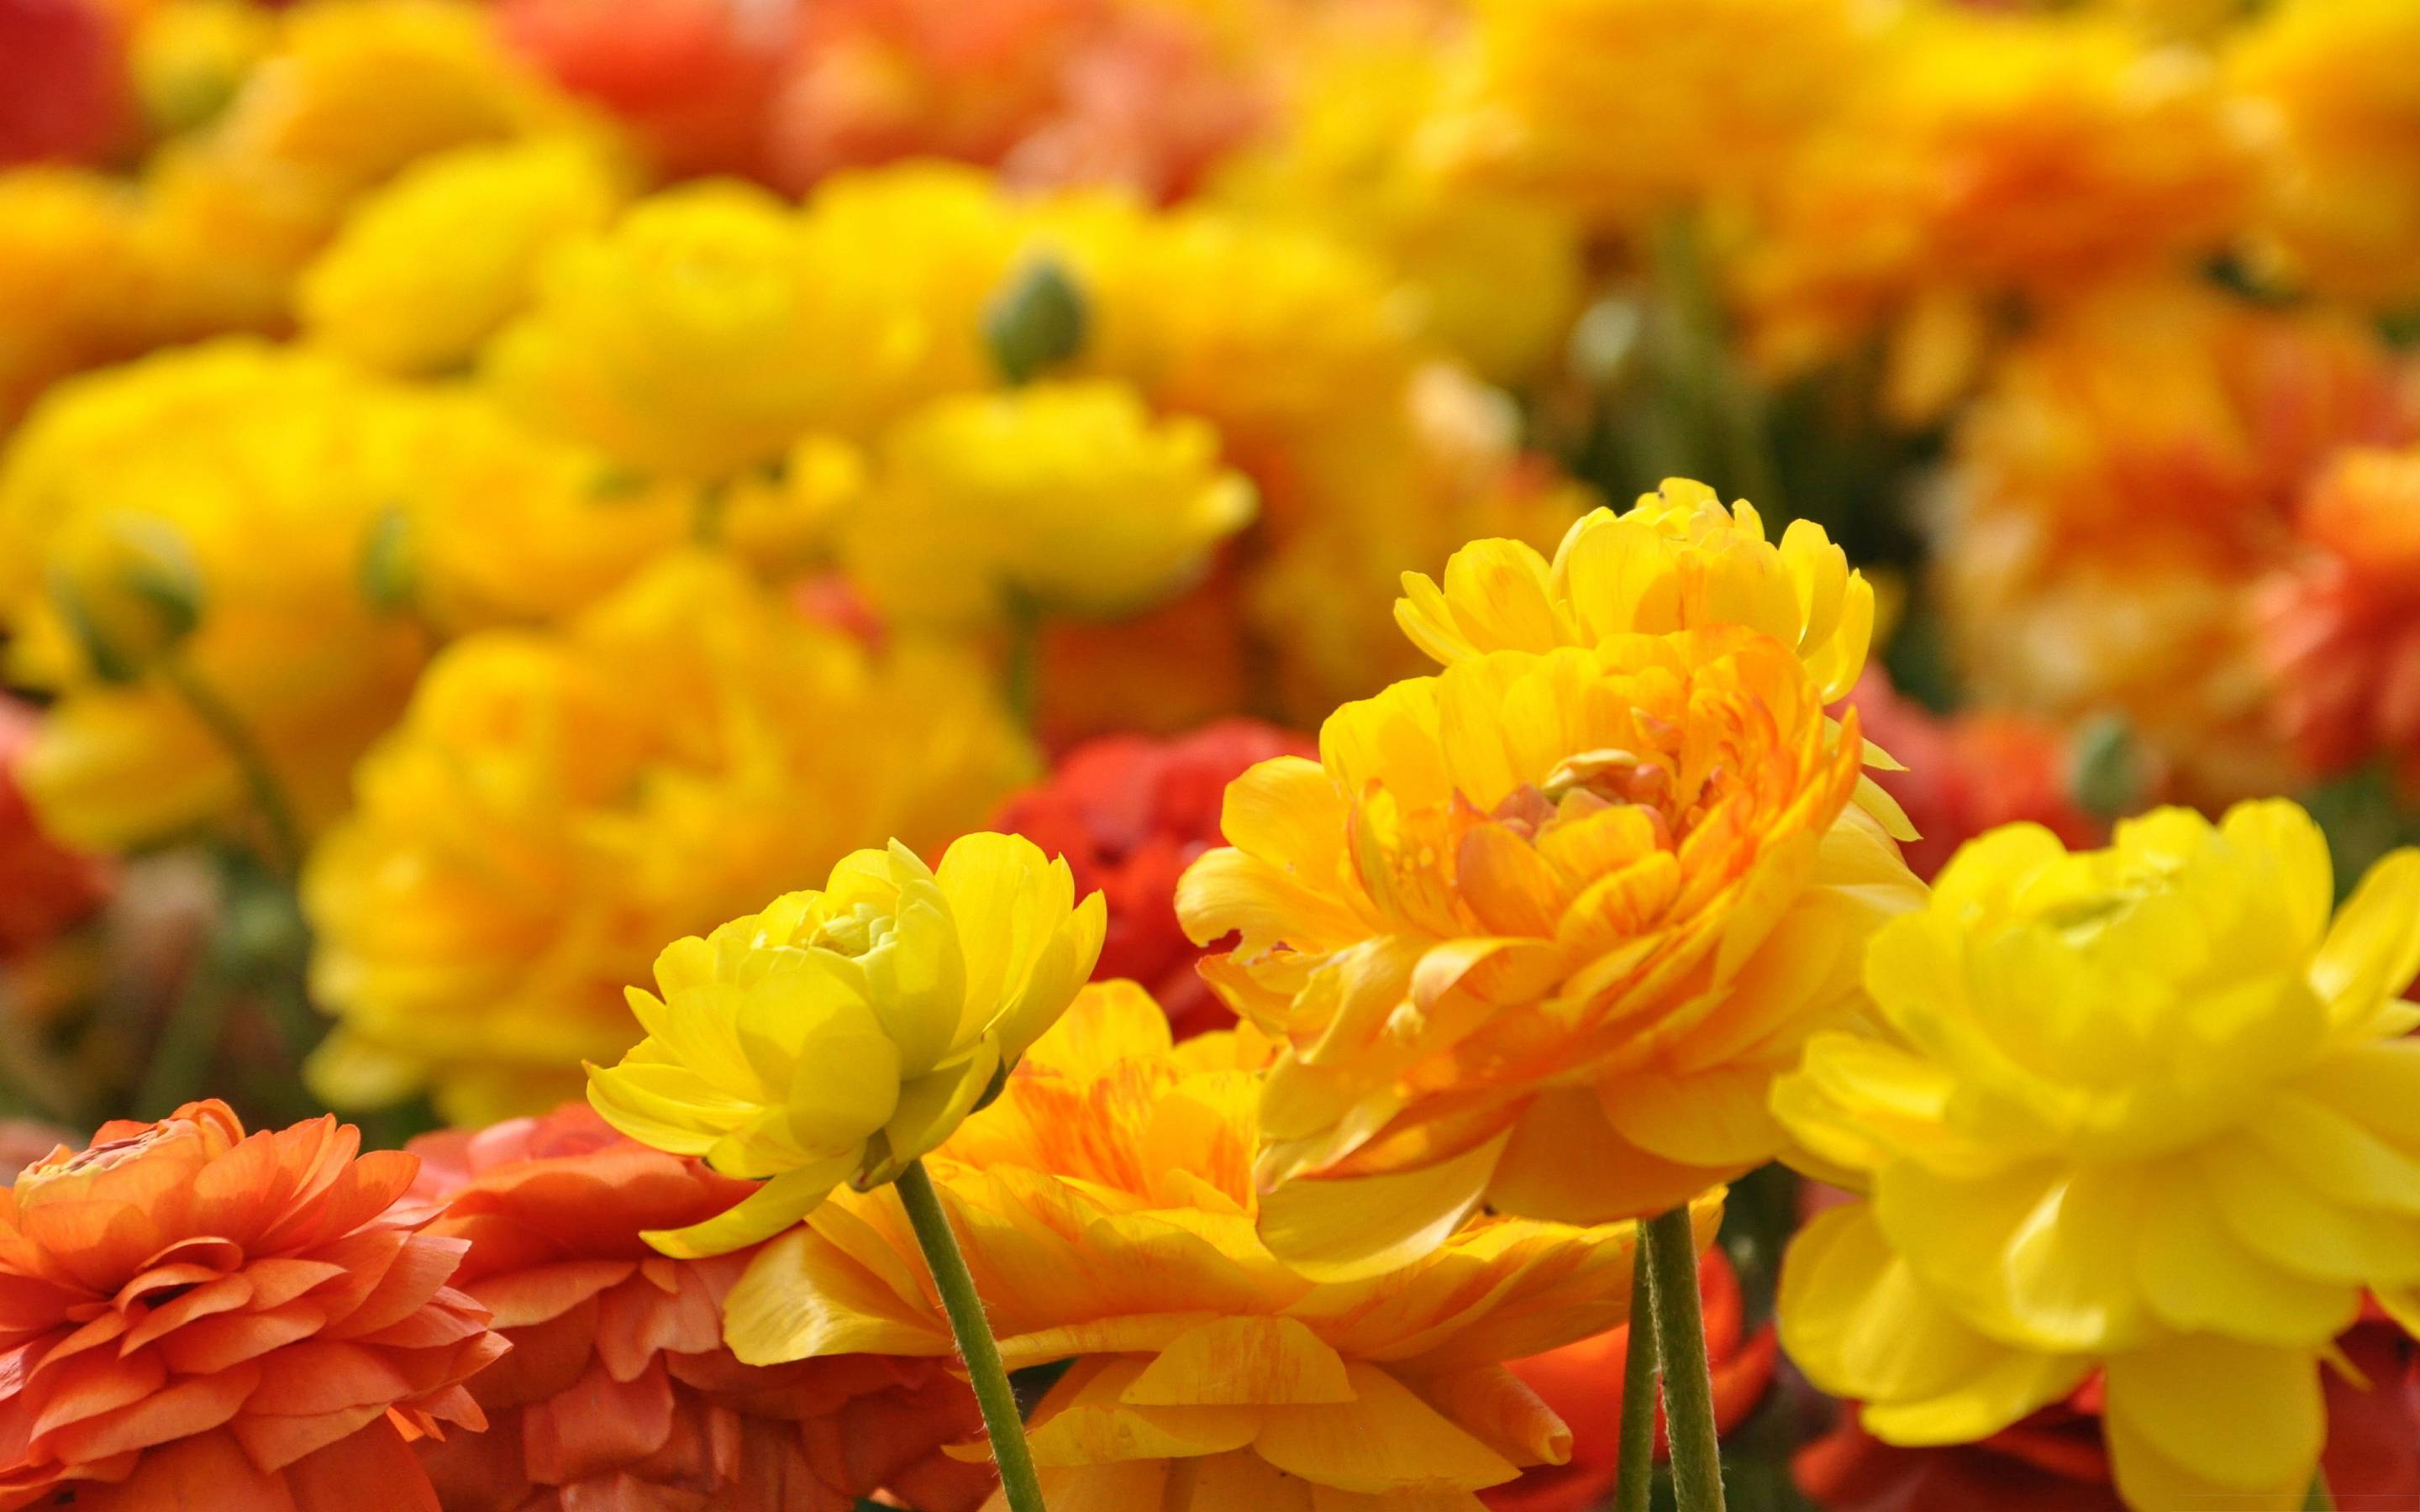 Lencir Kuning 25 Unique Flowers Full Hd Wallpapers Download